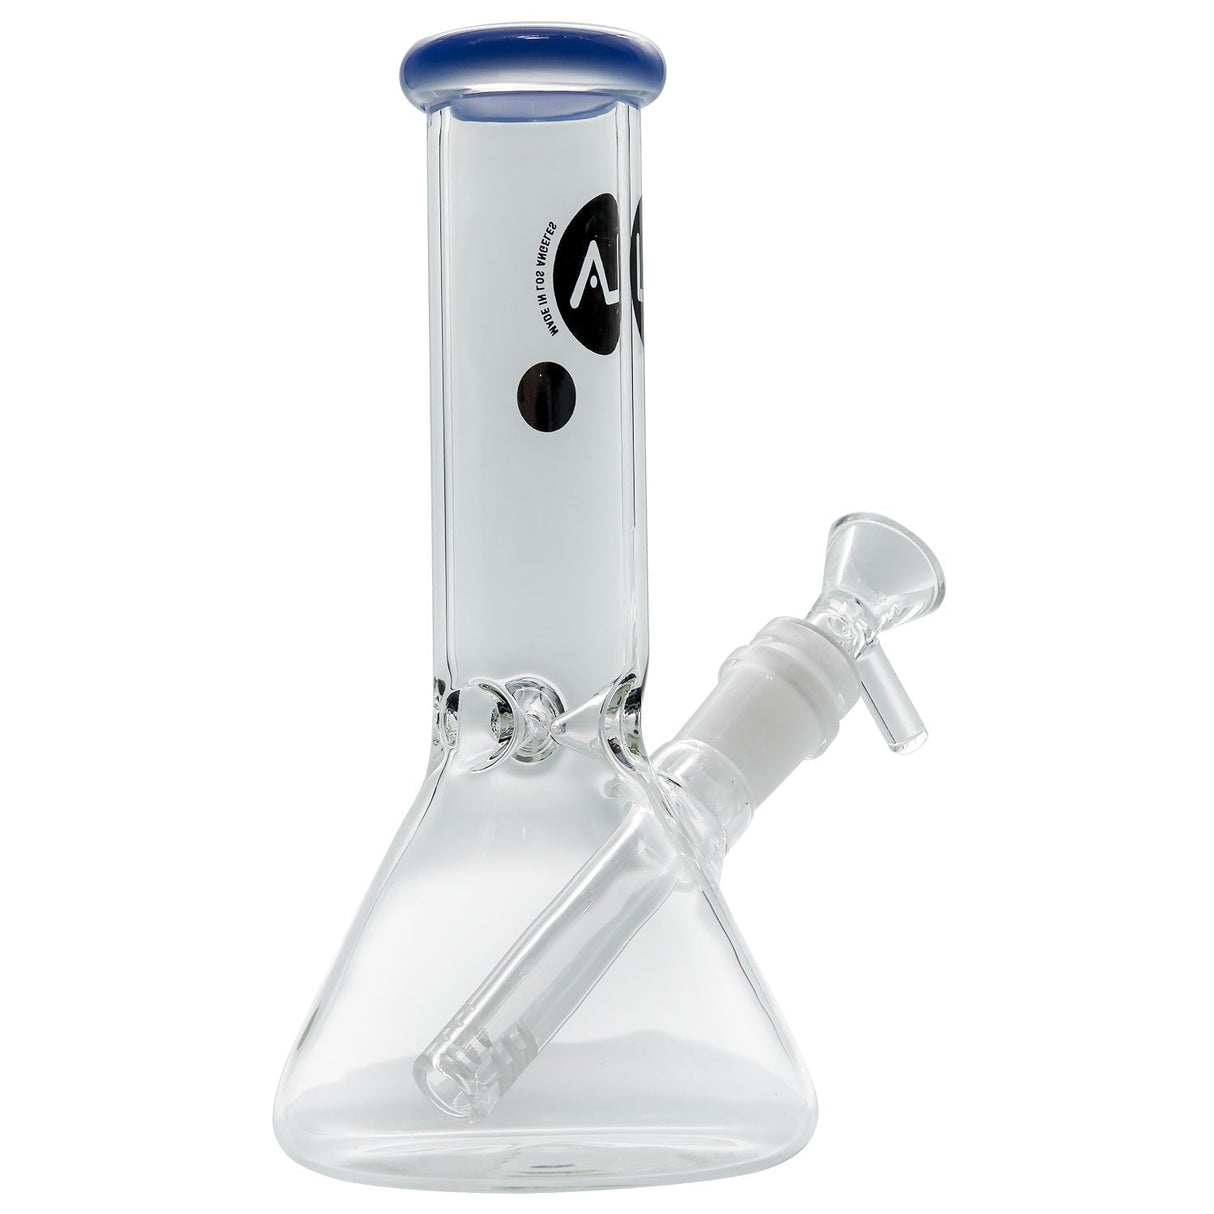 LA Pipes Beaker Bong in Clear with Blue Accents, 8", Front View on White Background